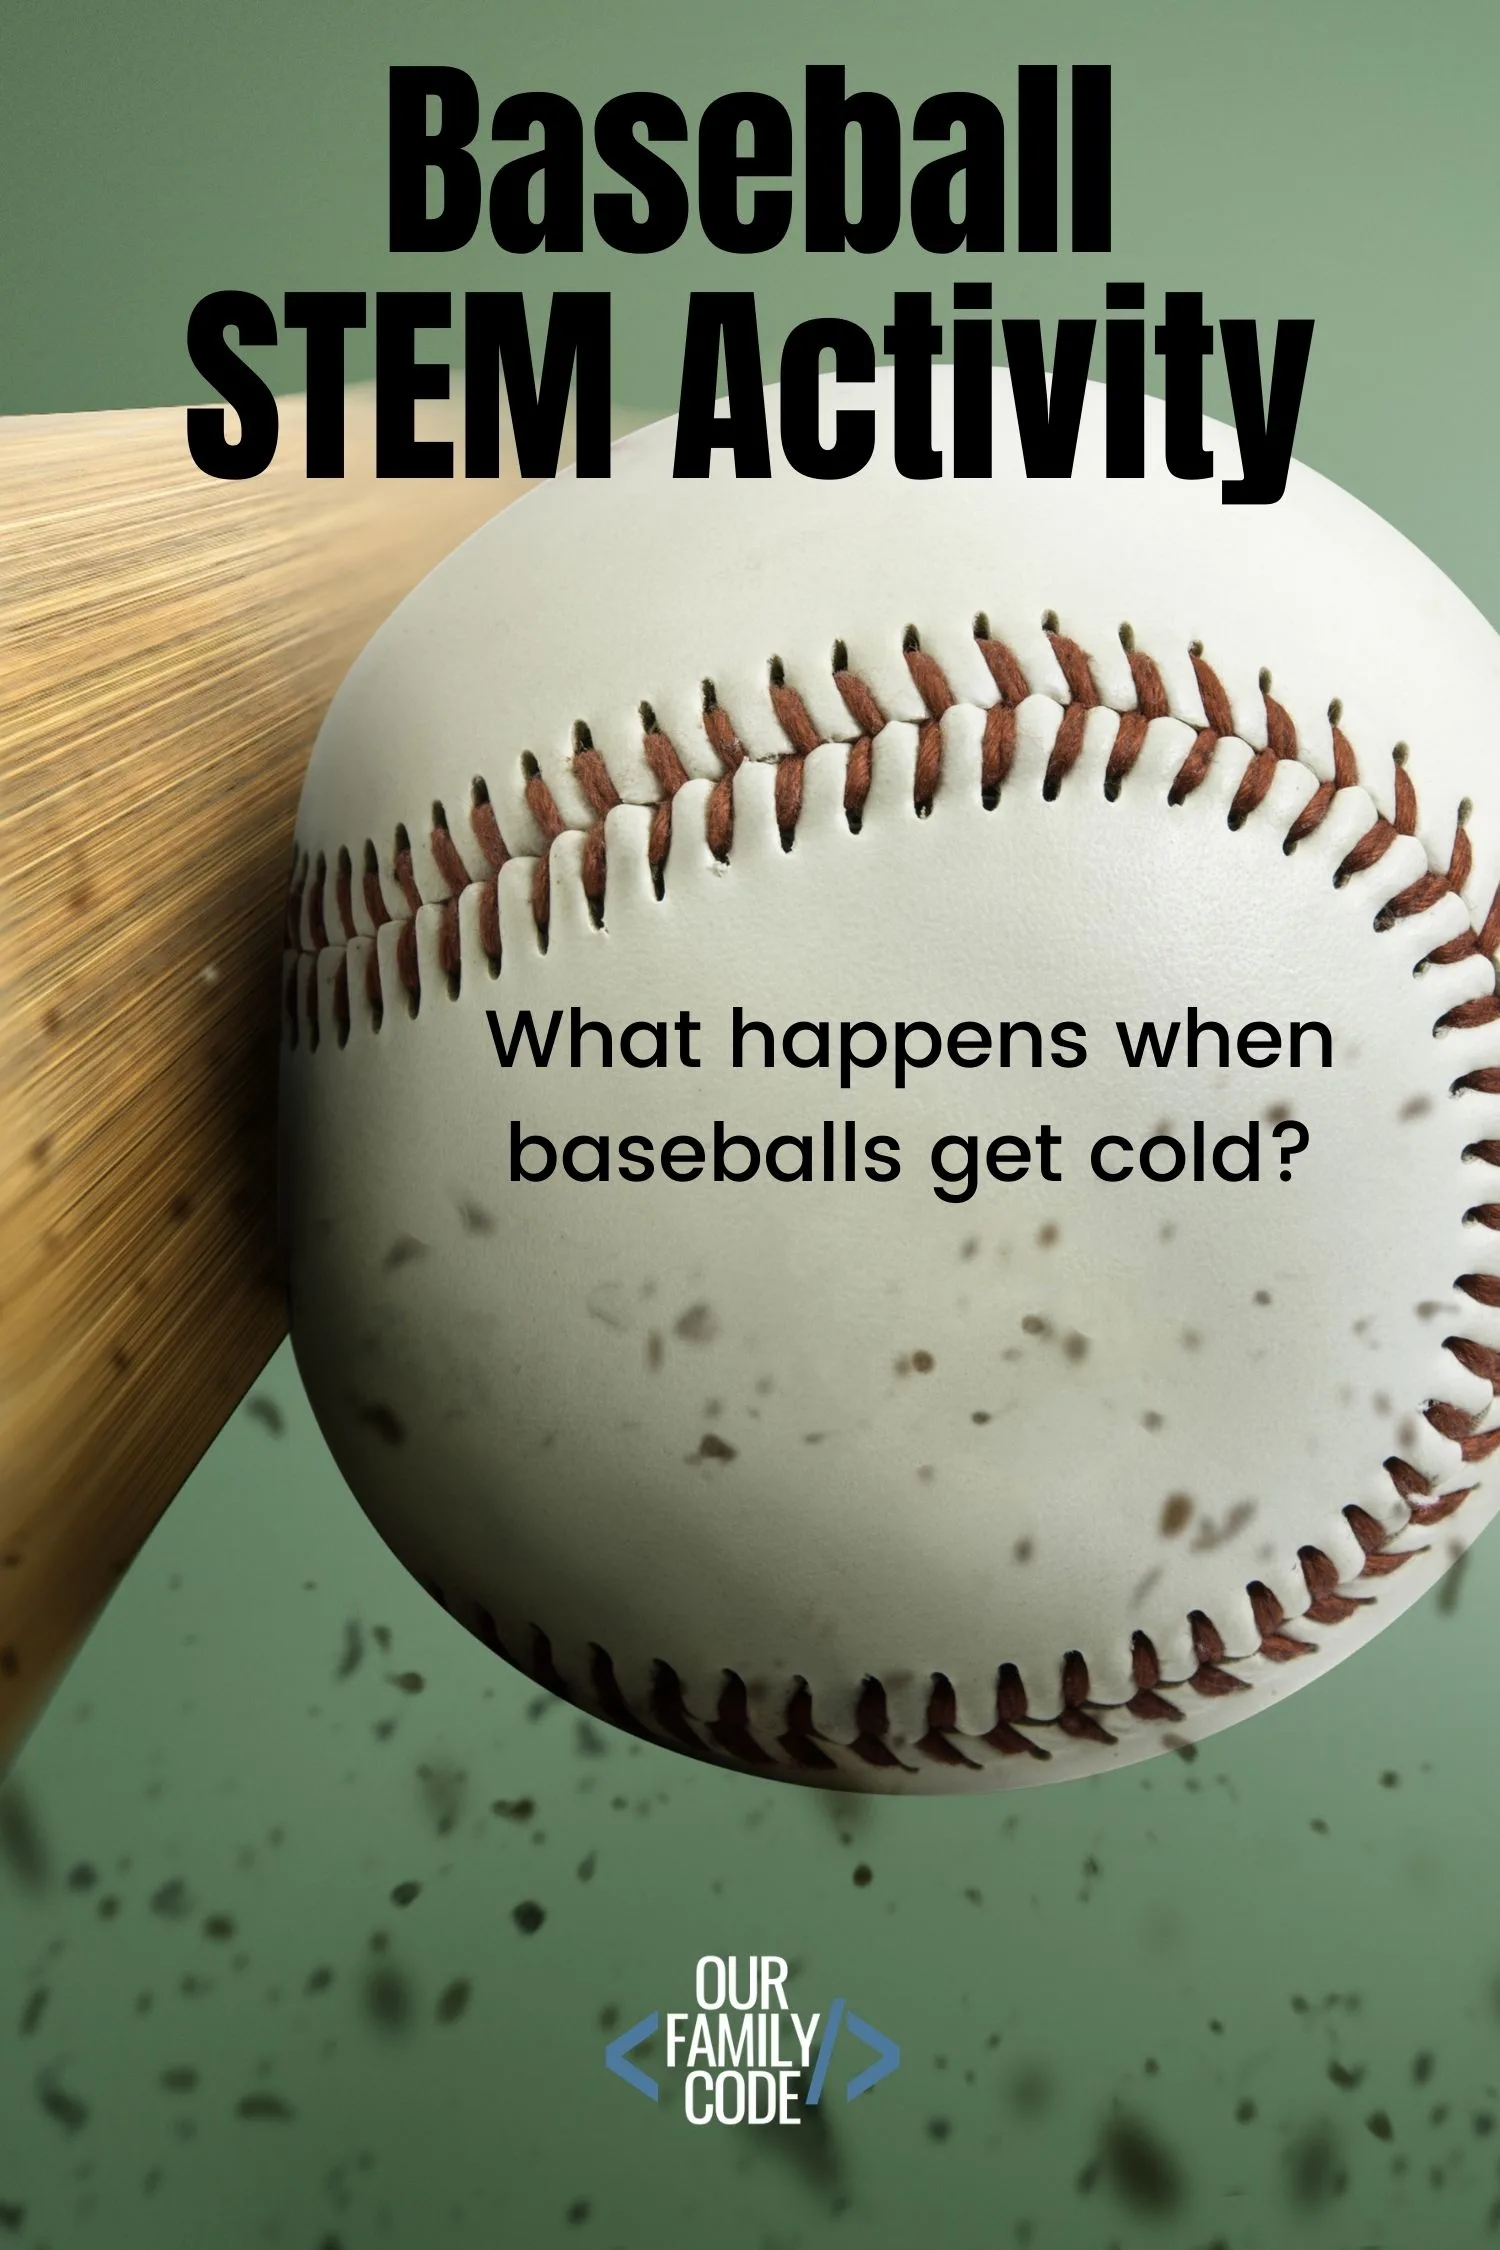 A picture of a baseball being hit by a bat with a light green background and text that reads "baseball STEM activity what happens when baseballs get cold?"